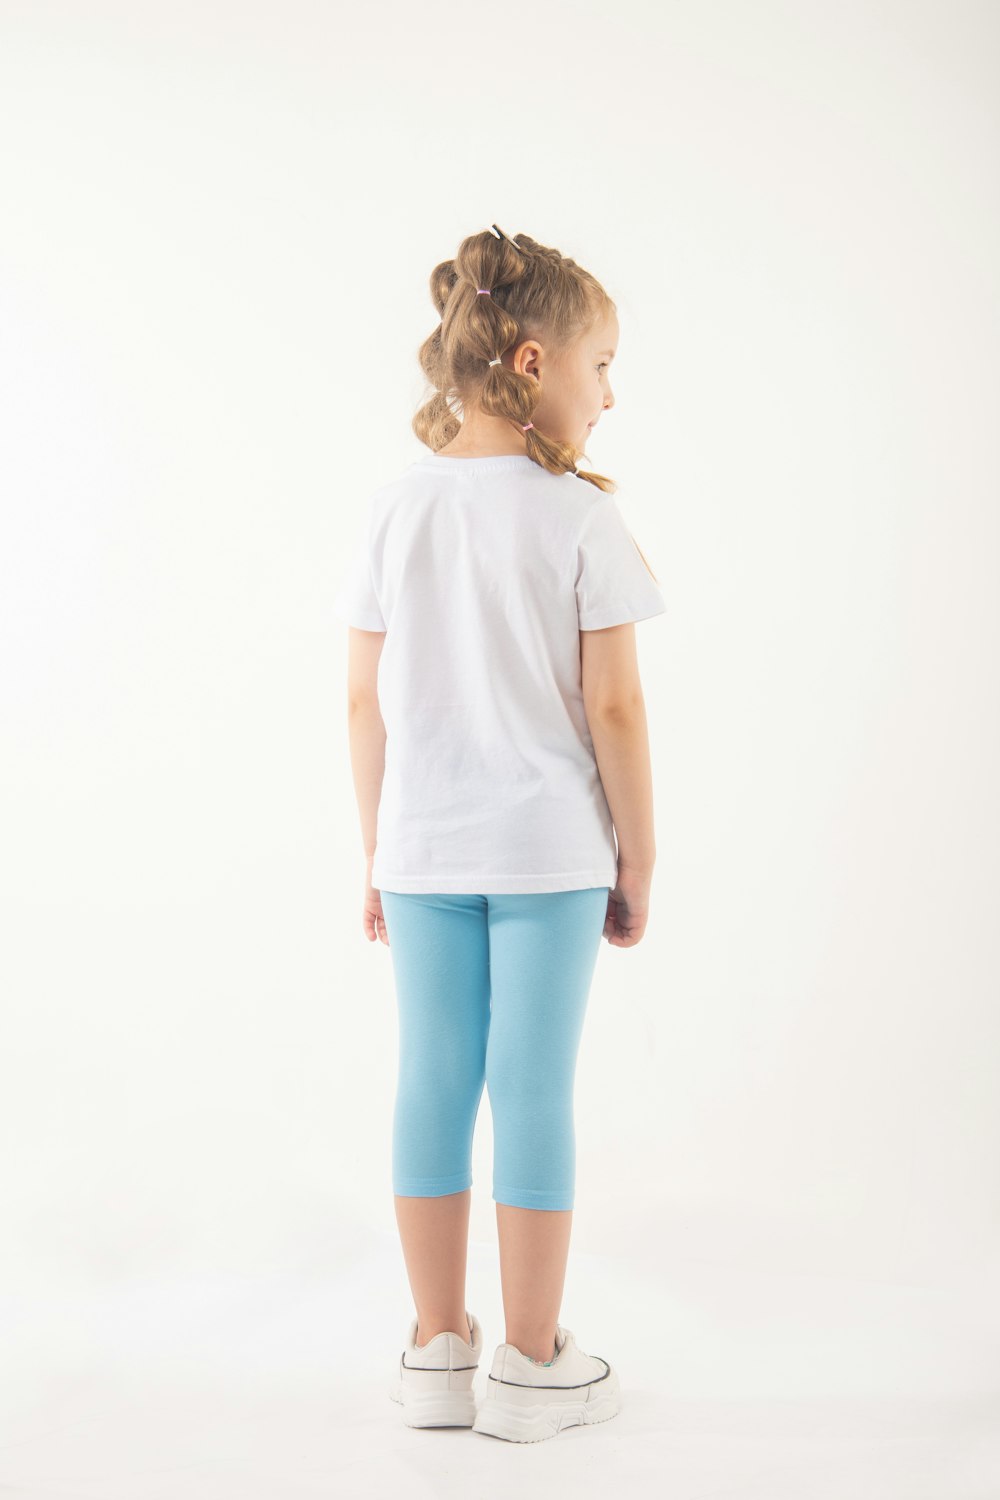 A little girl wearing blue leggings and a white t - shirt photo – Free  Beautiful clothes Image on Unsplash